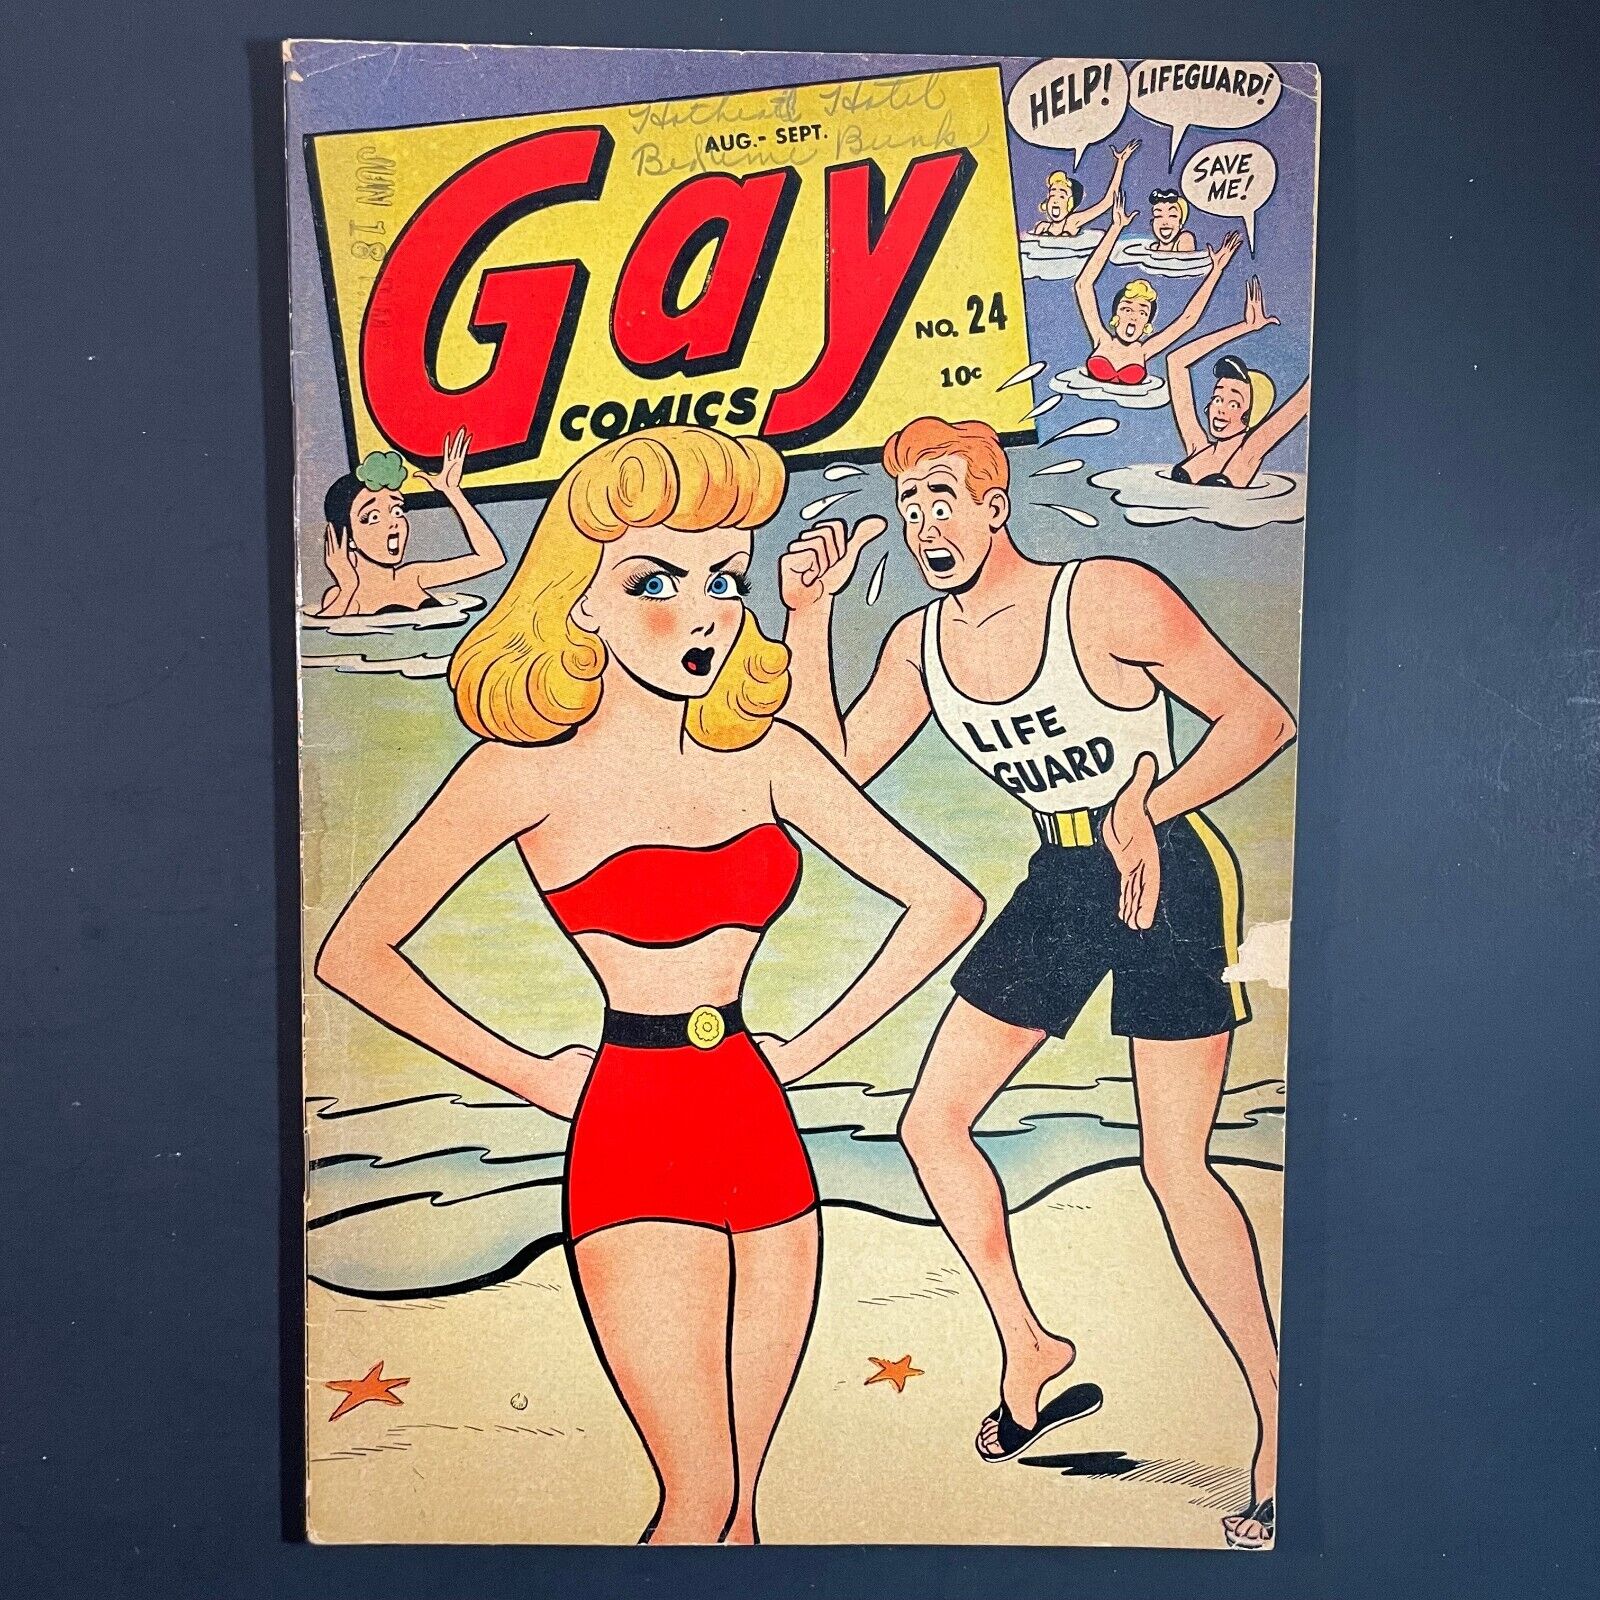 Gay Comics 24 GOLDEN AGE Timely 1946 Good Girl Tessie the Typist cover Wolverton